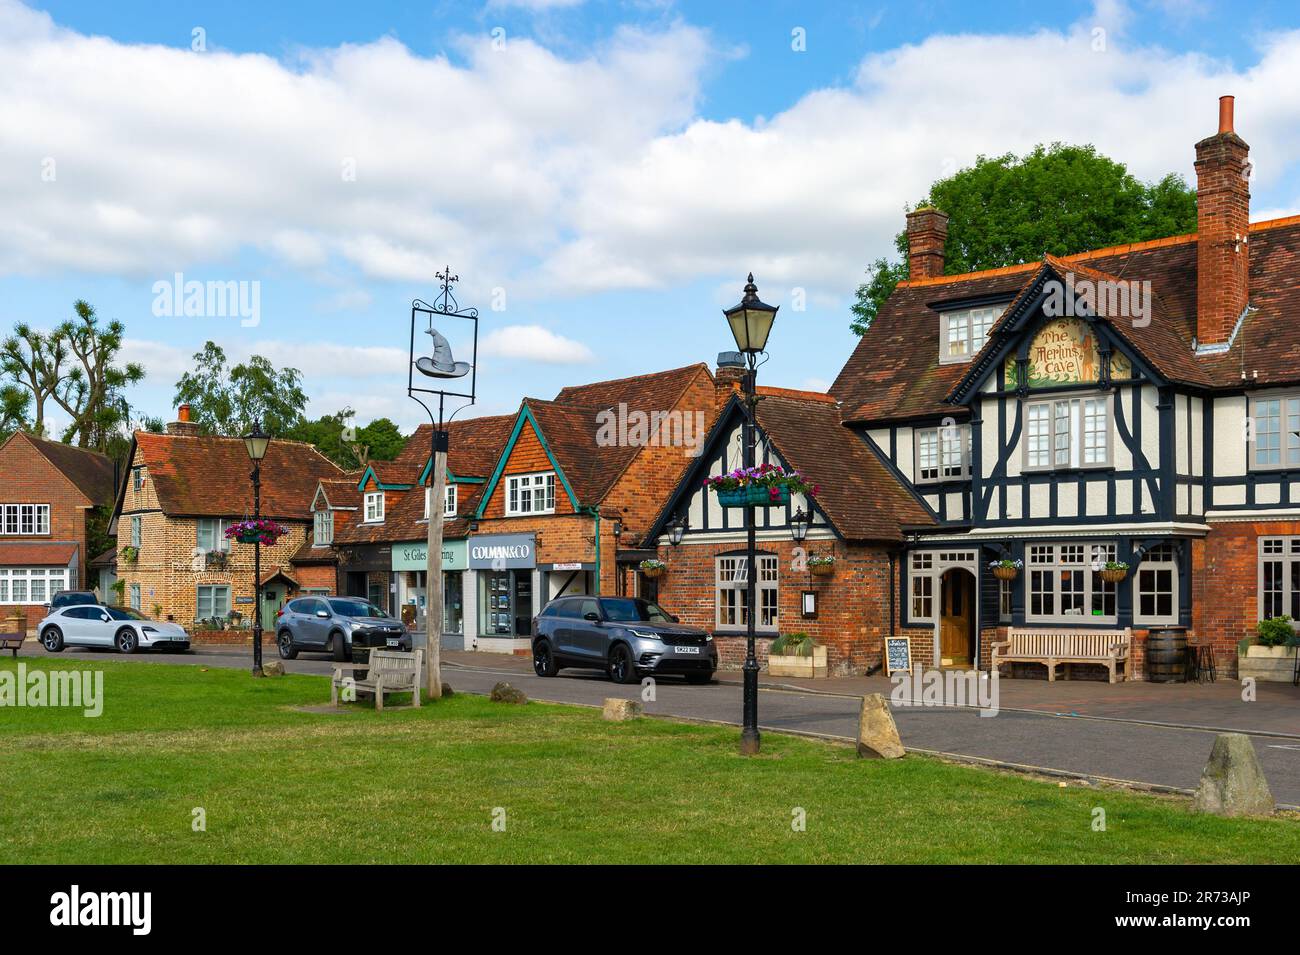 The Village Green at Chalfont St Giles, Buckinghamshire, England Stock Photo